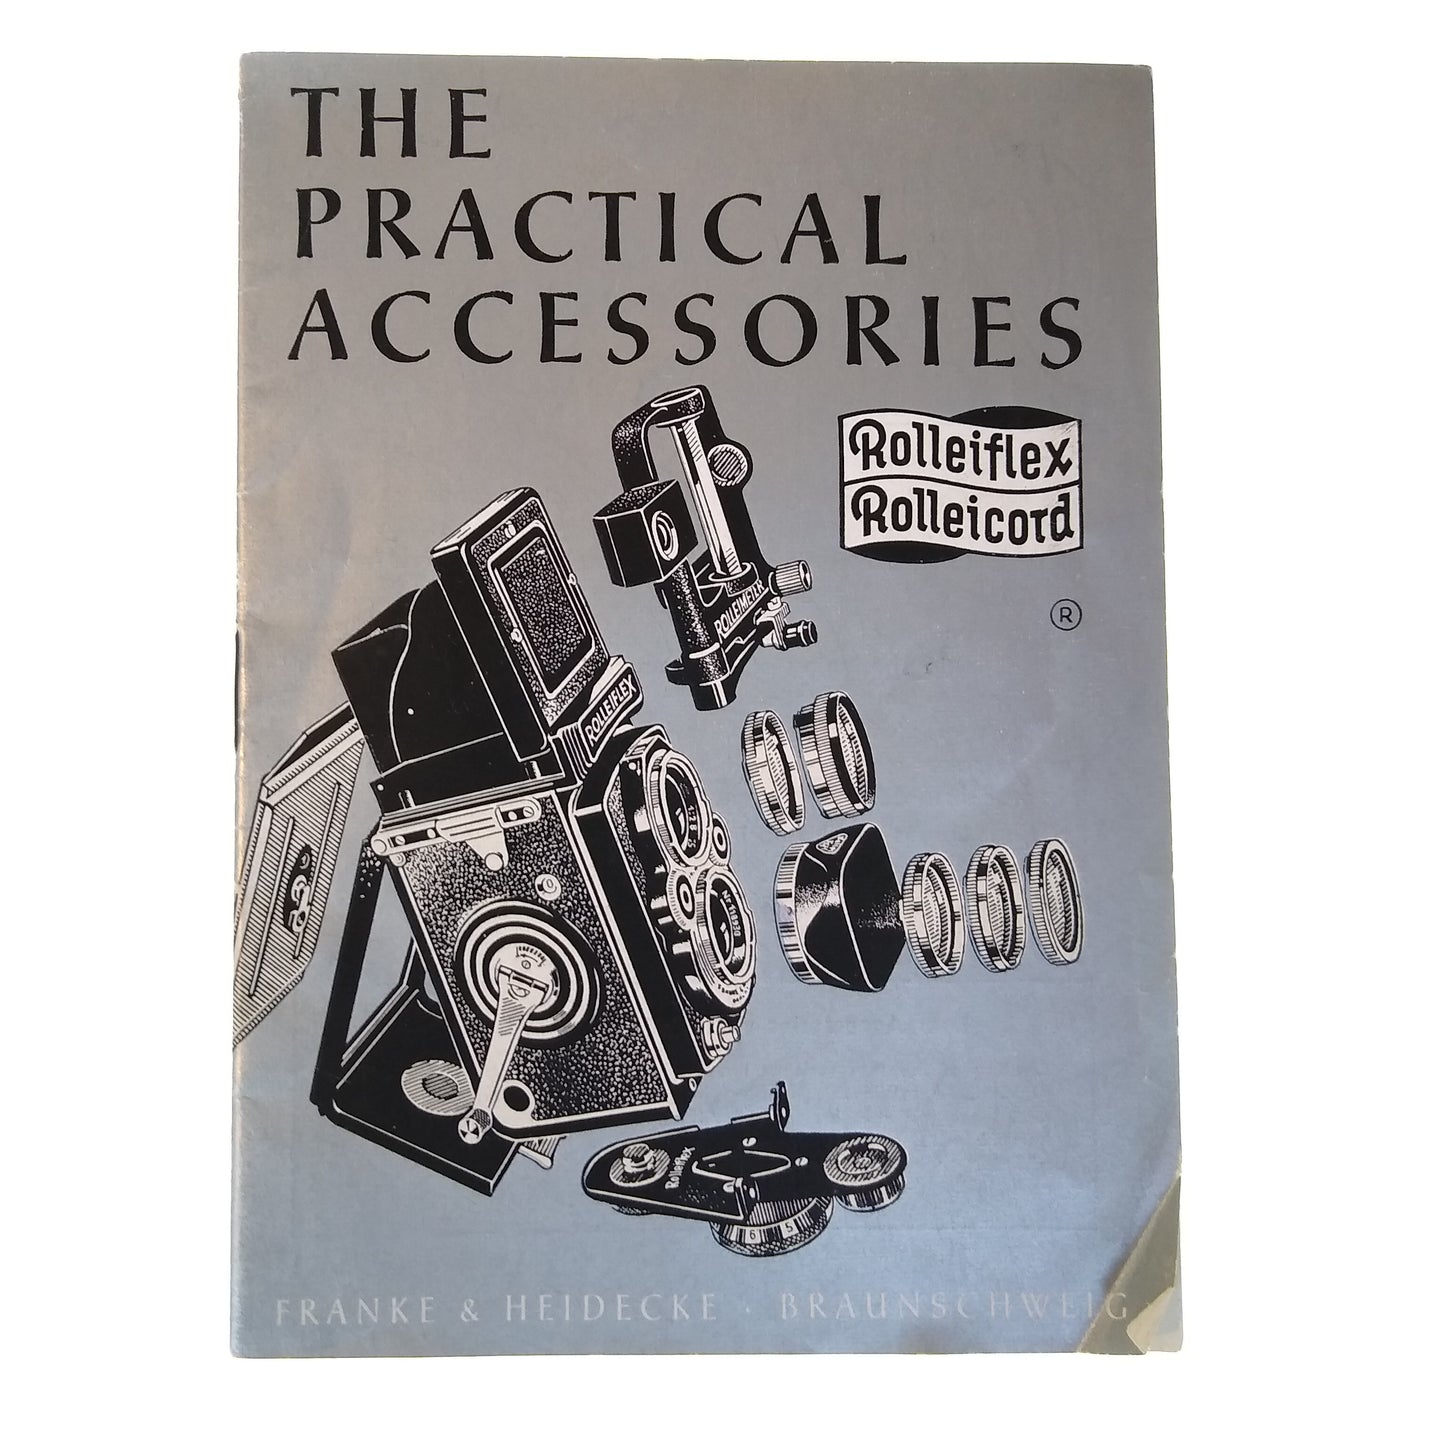 "The Practical Accessories" (no. 0654) Brochure for Rolleiflex and Rolleicord.